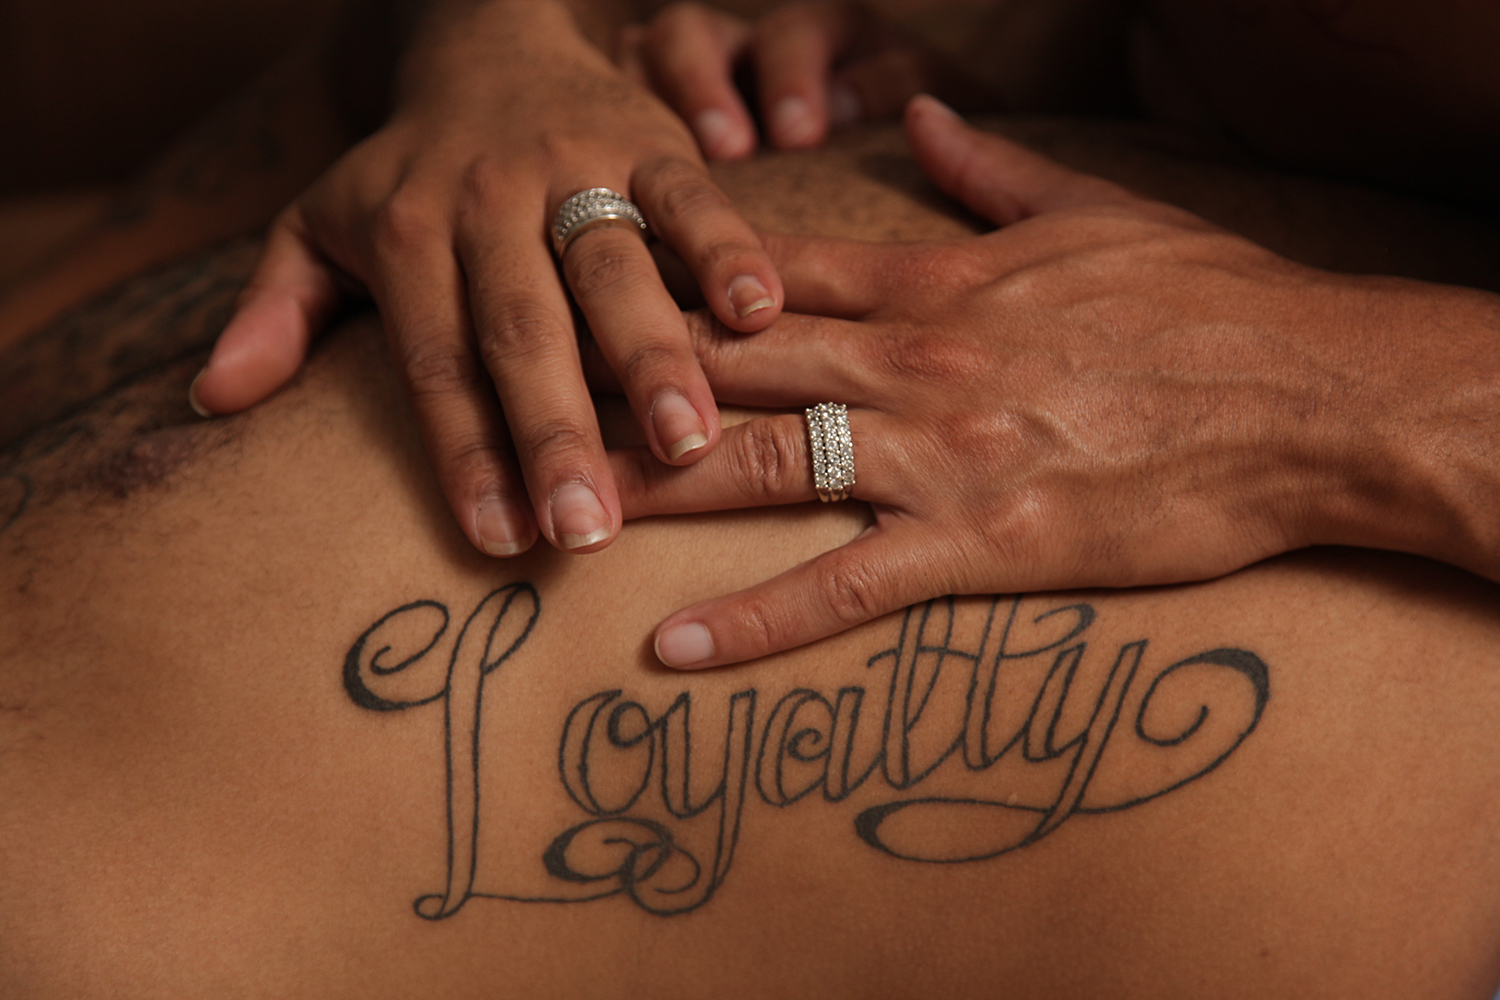 A man's hands on another's back with the tattoo reading "Loyalty" across the spine and shoulder blades.